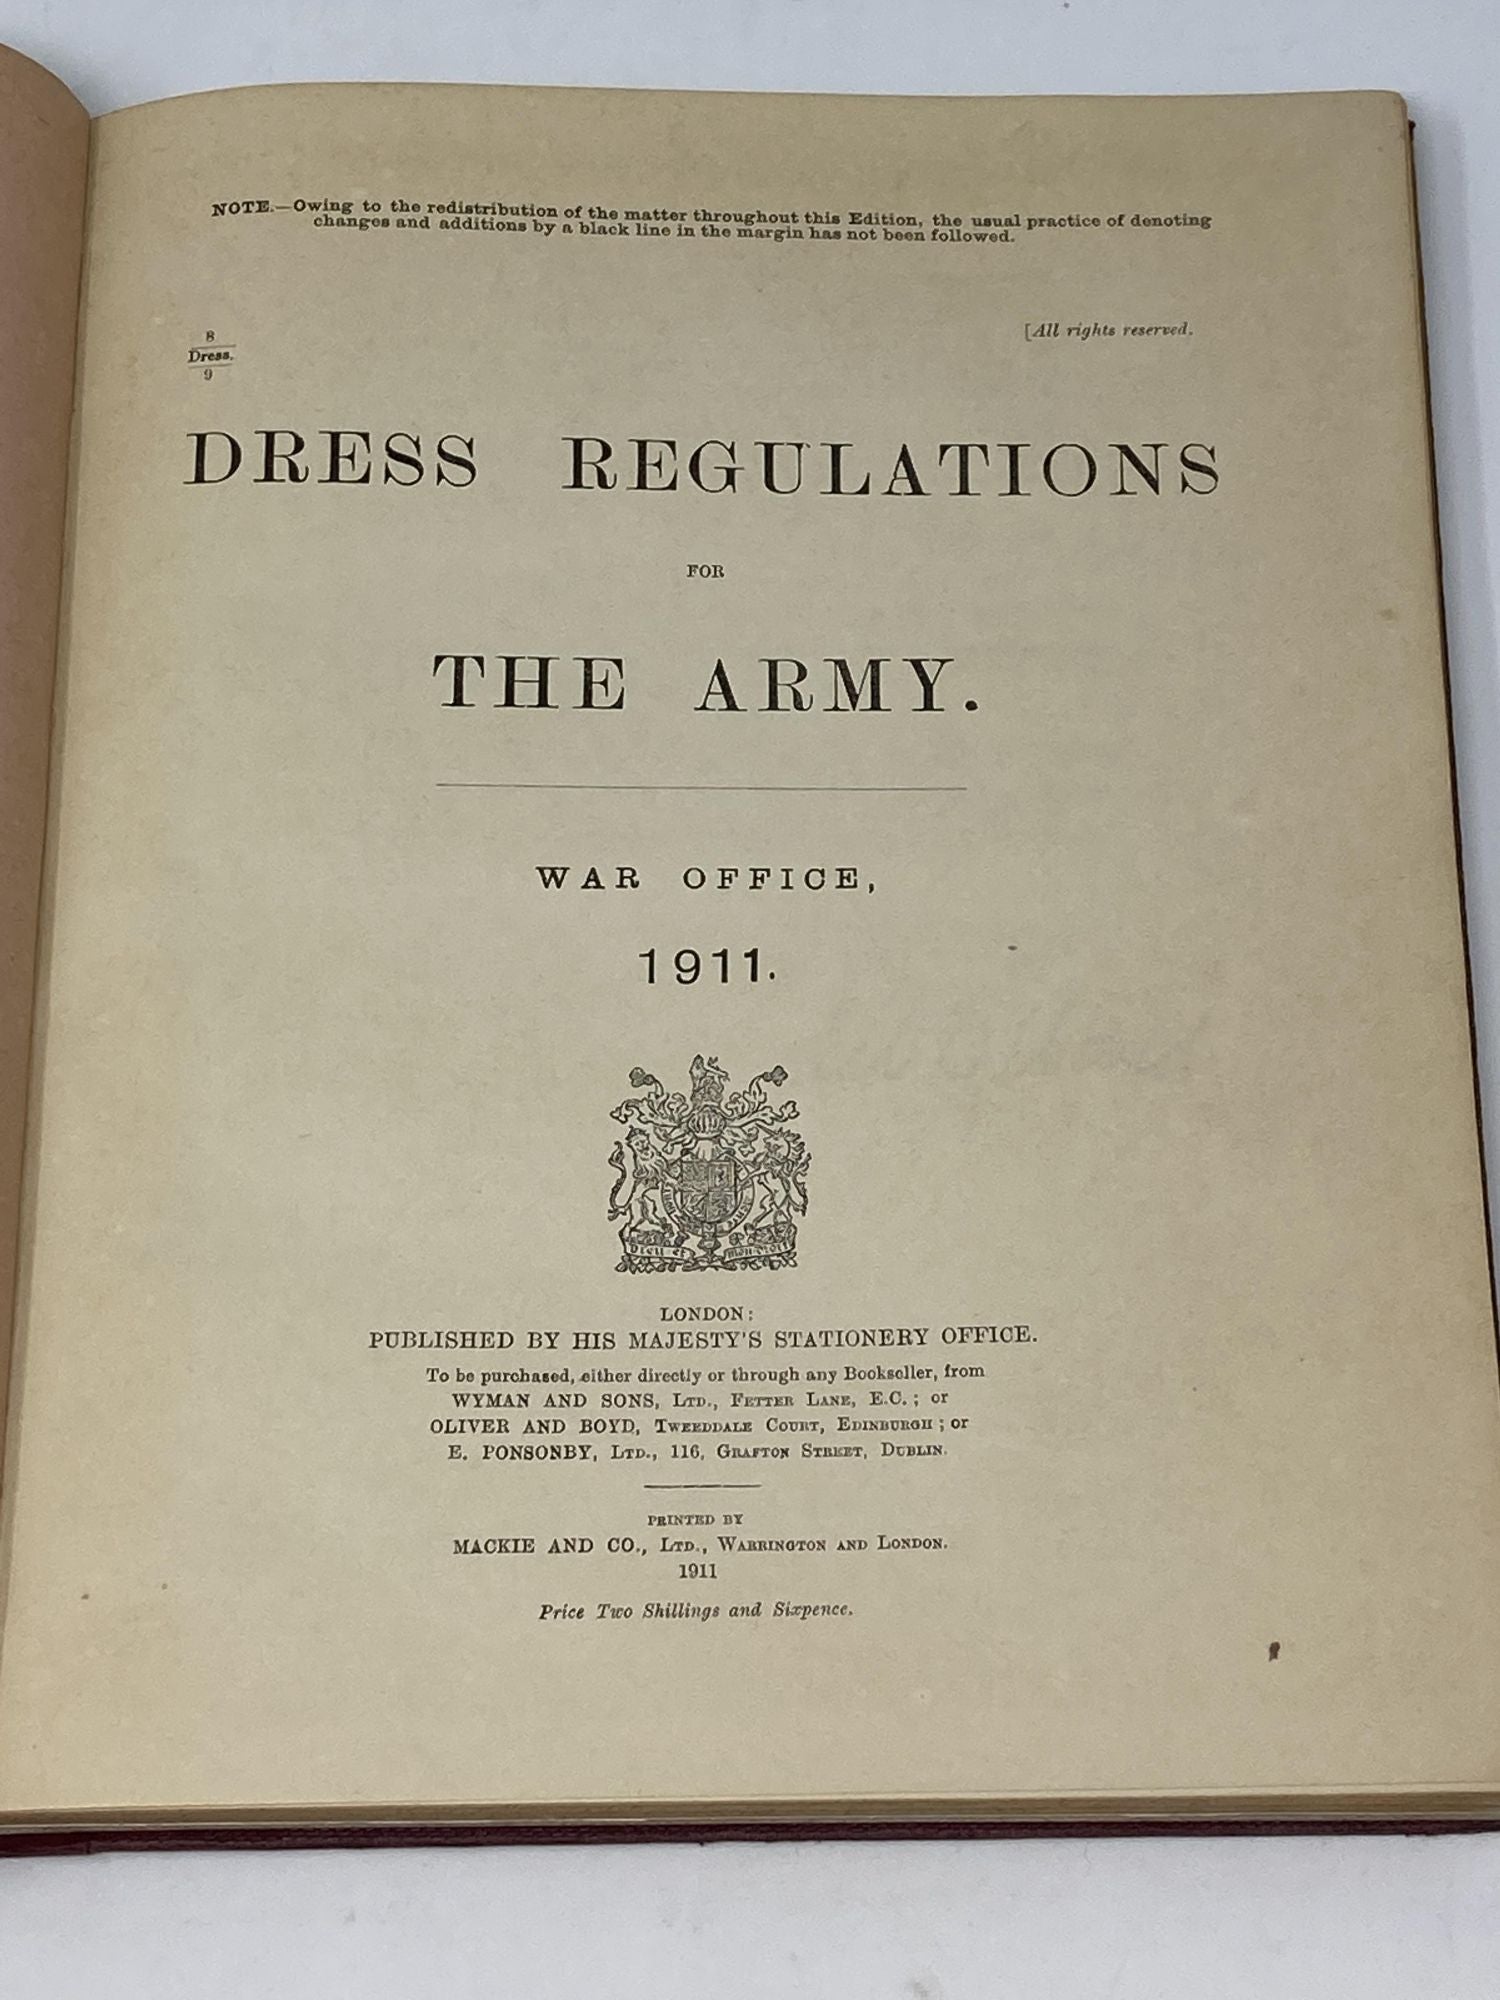 War Office - Dress Regulations for the Army